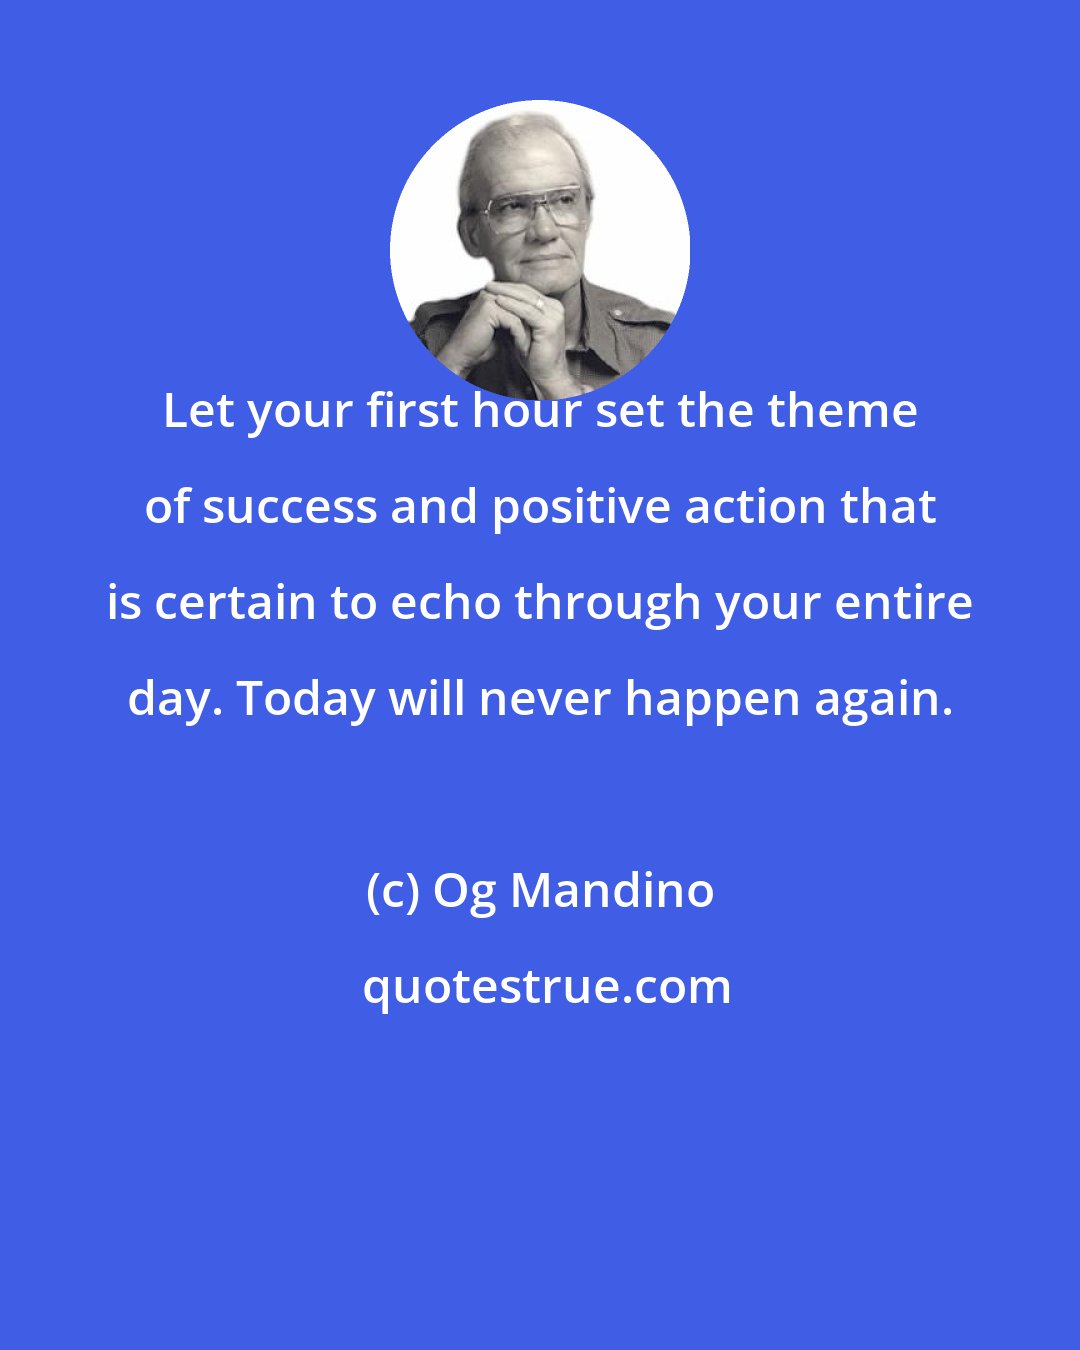 Og Mandino: Let your first hour set the theme of success and positive action that is certain to echo through your entire day. Today will never happen again.